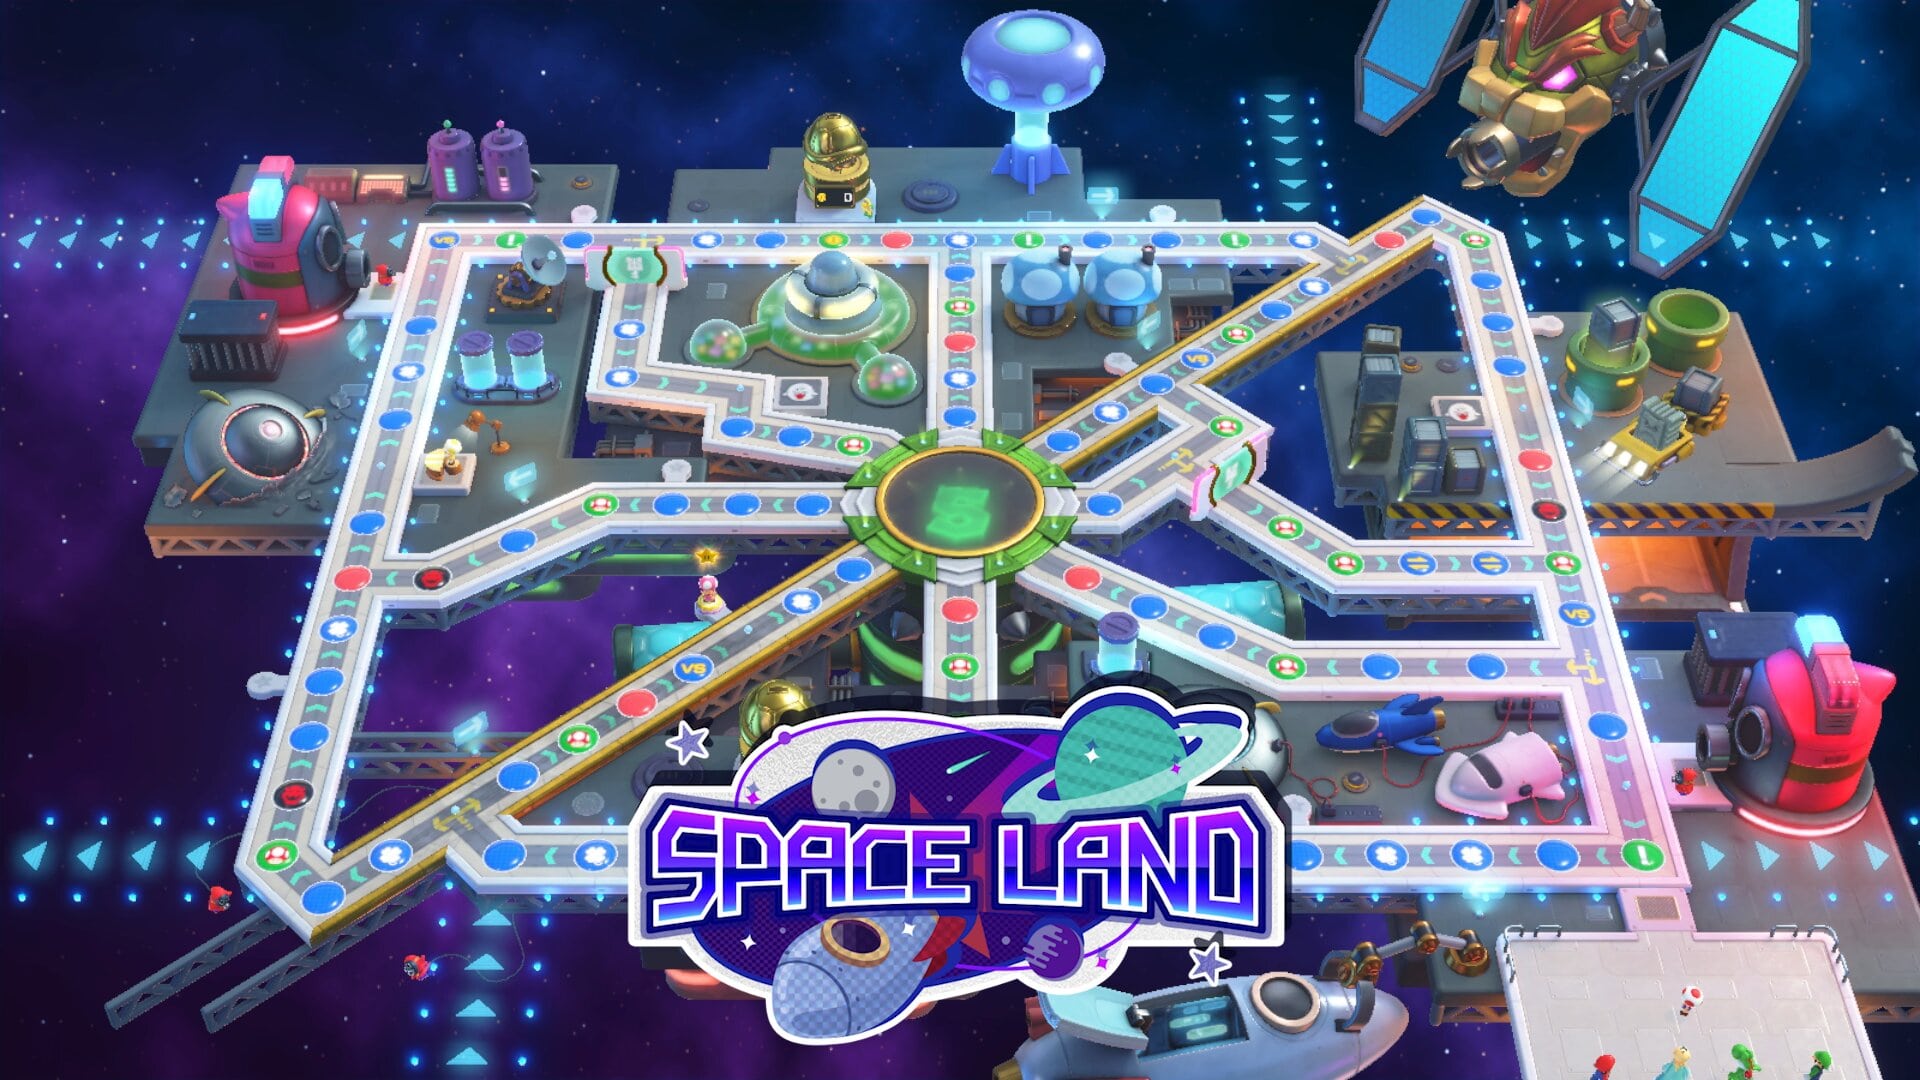 The Space Land map in Mario Party Superstars.